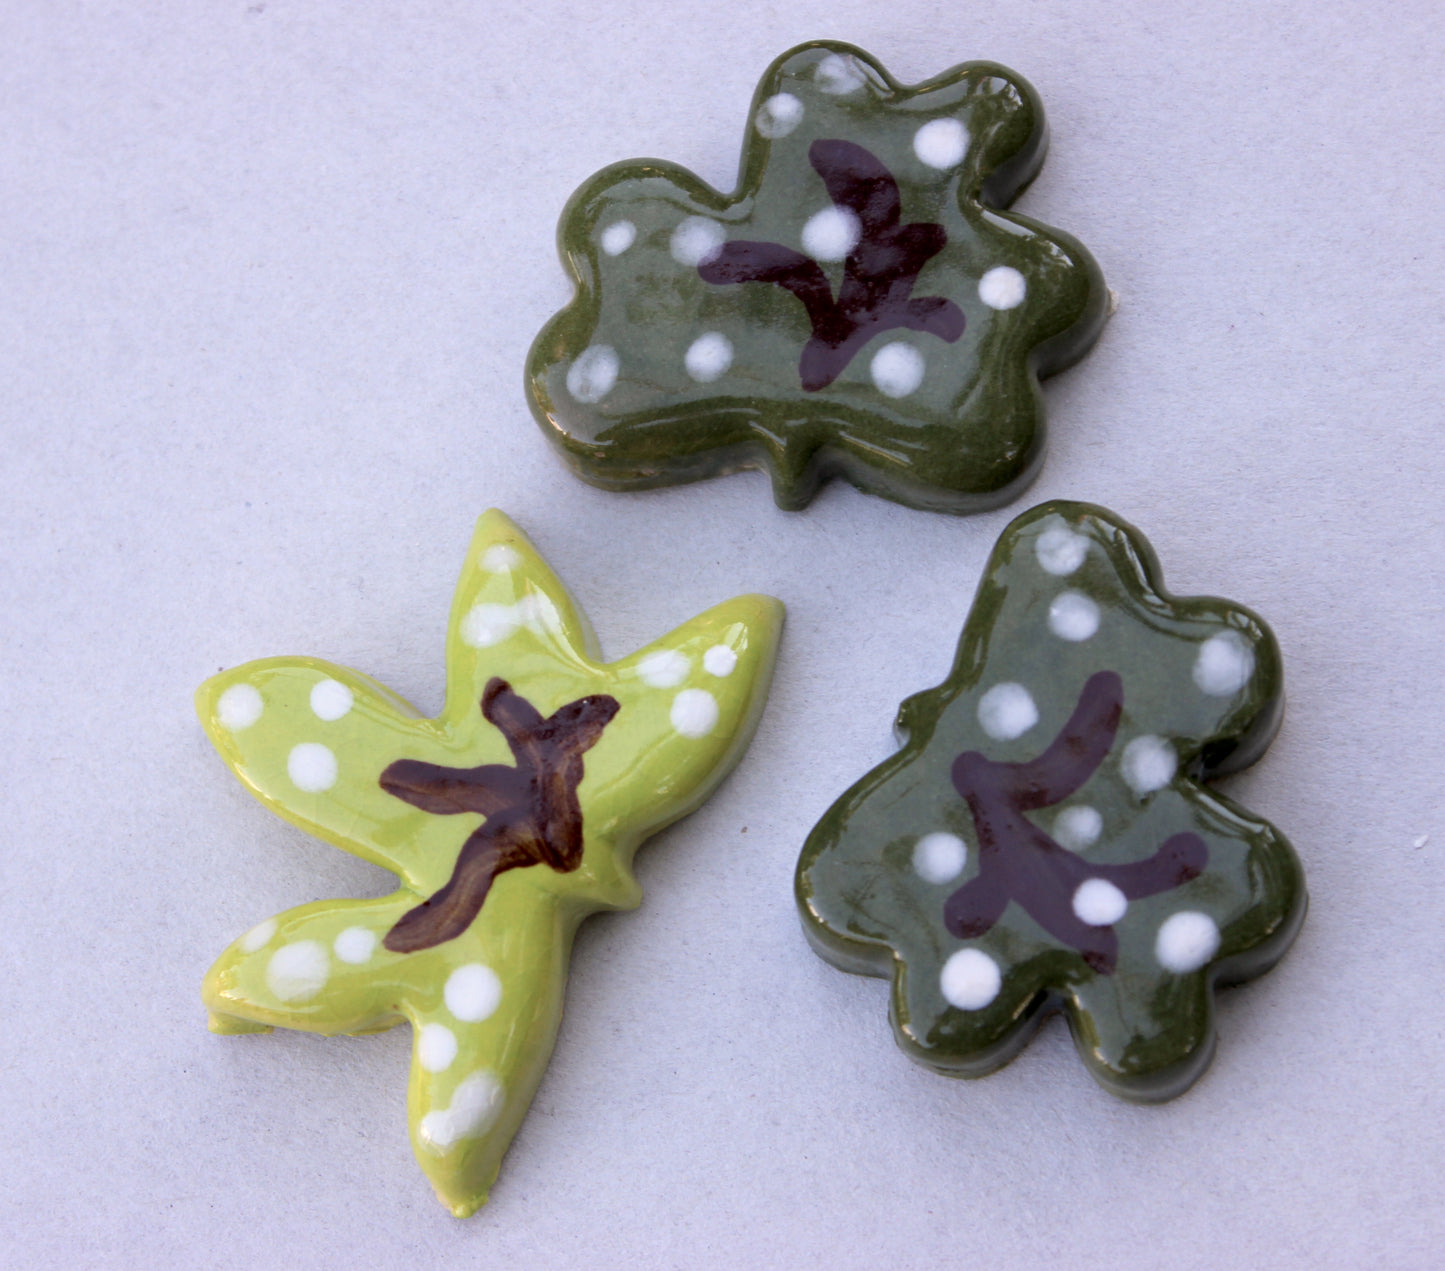 Small Whimsy Leaf Tile Set for Mosaics and Crafting